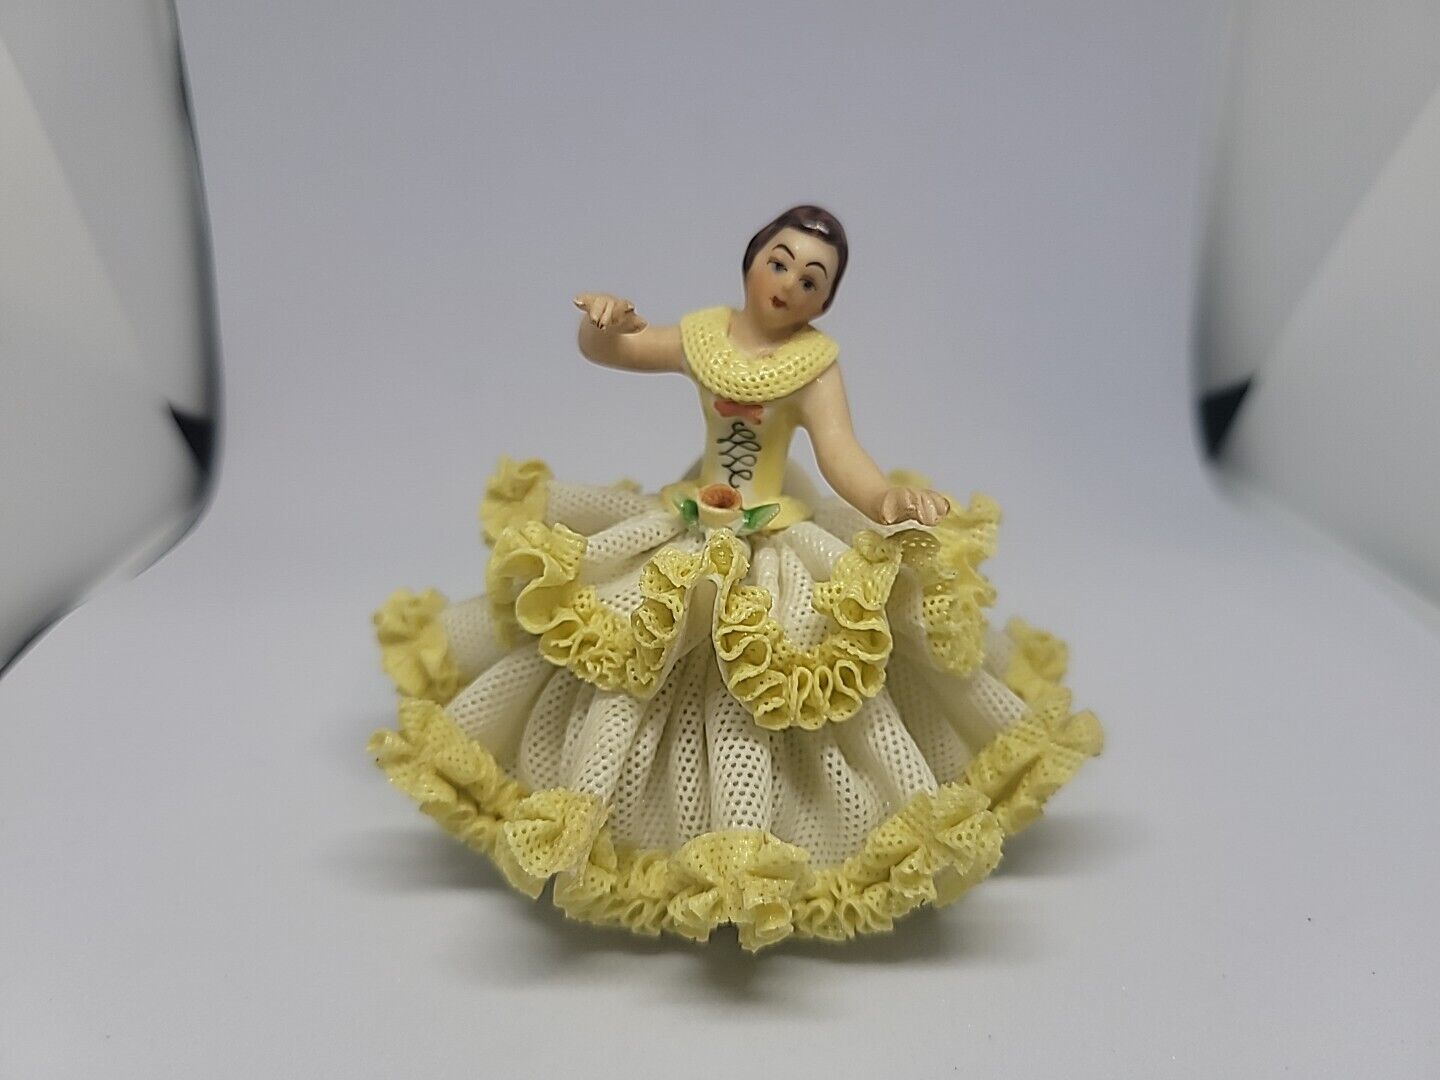 Dresden porcelain lace figurine Germany Stamped Antique Yellow Dancer